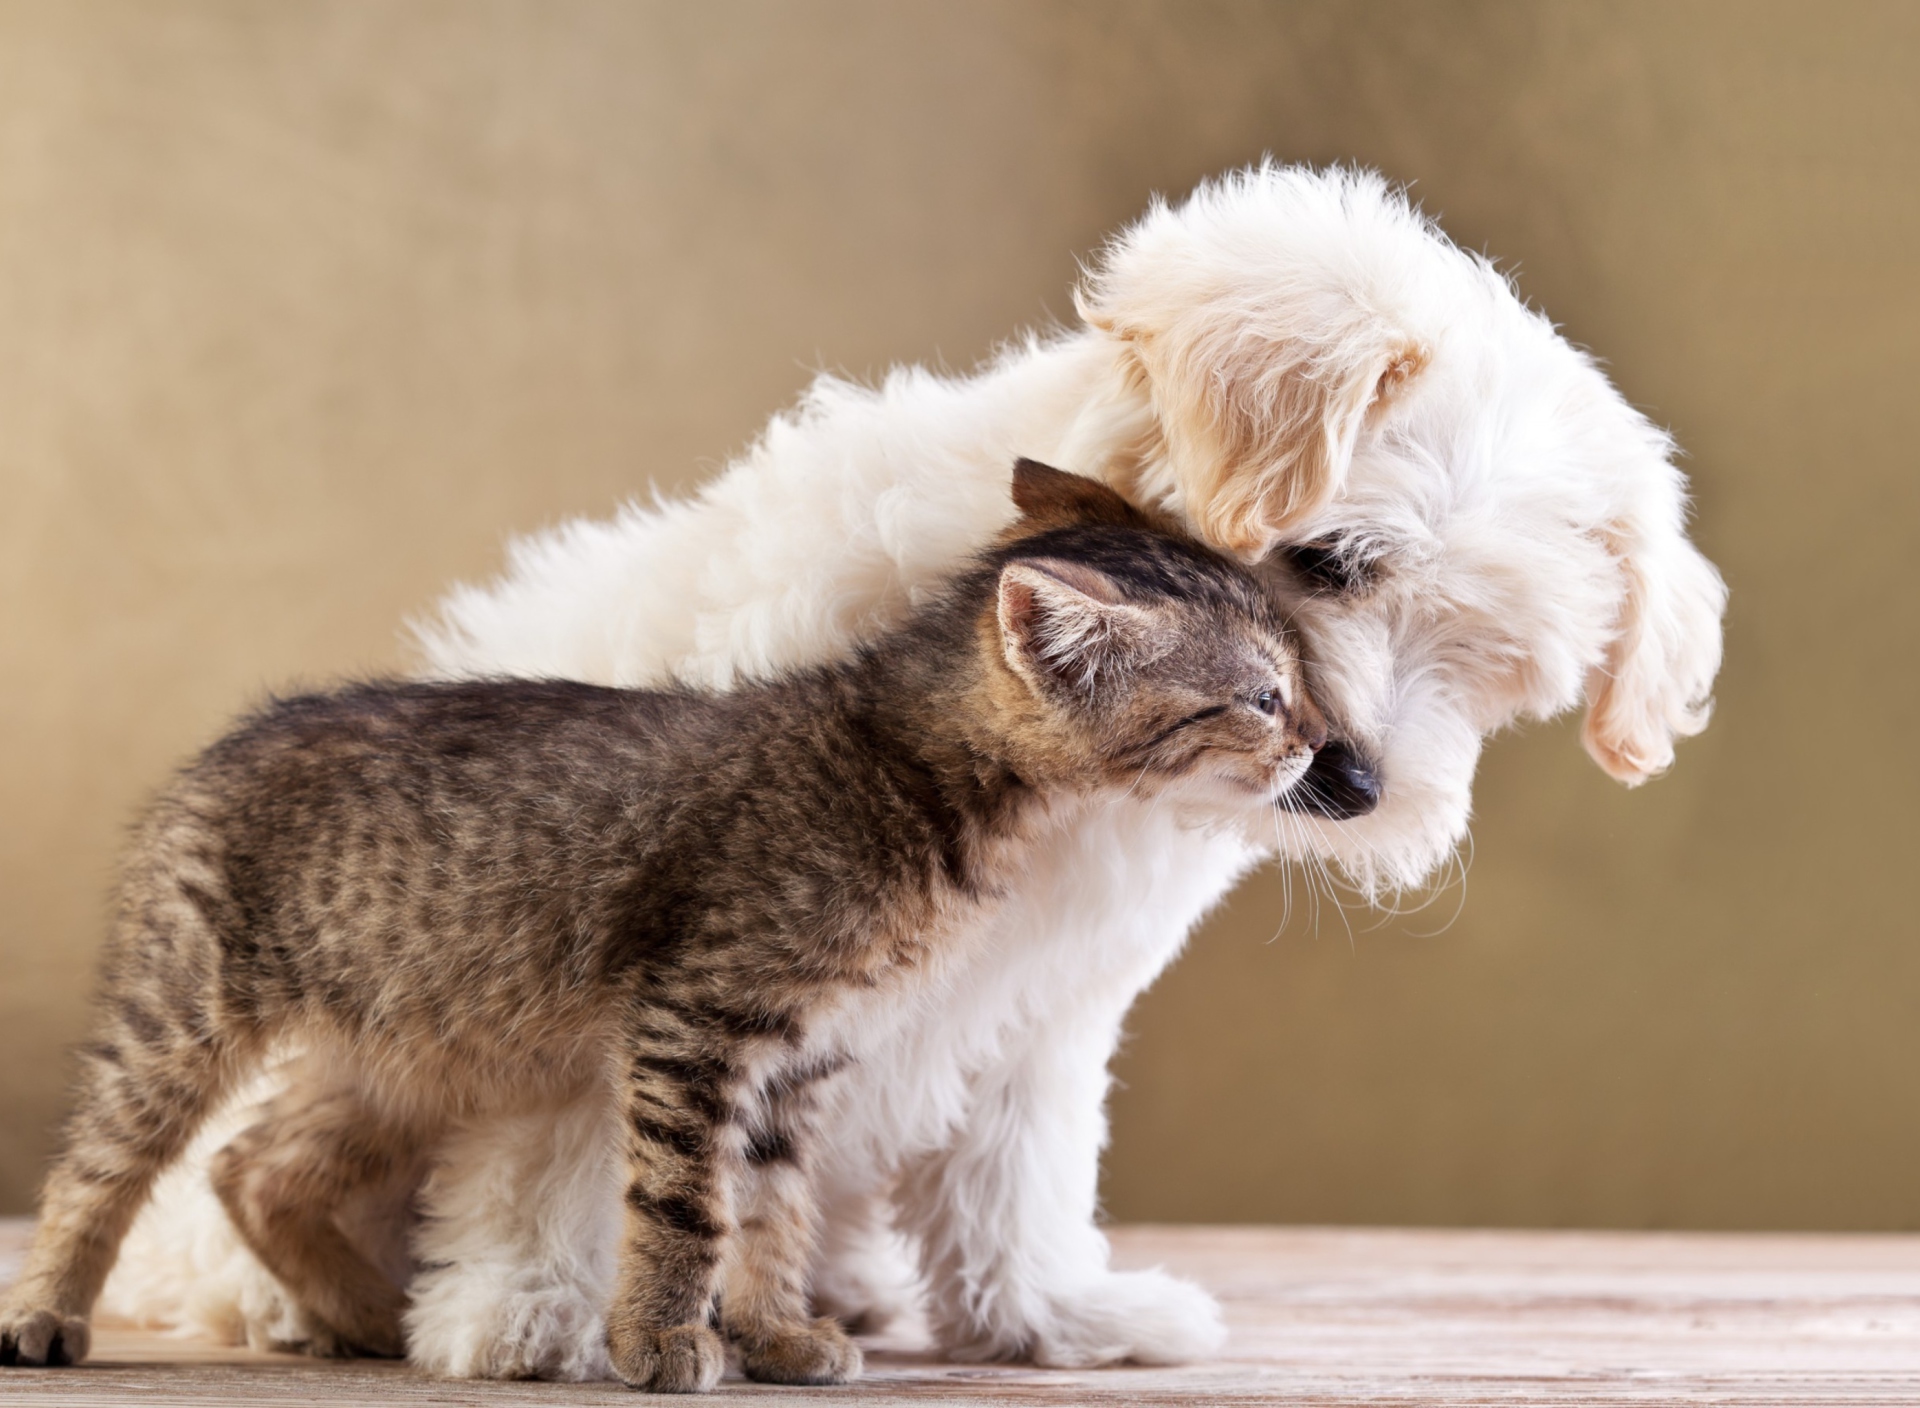 Life Of Cat And Dog wallpaper 1920x1408